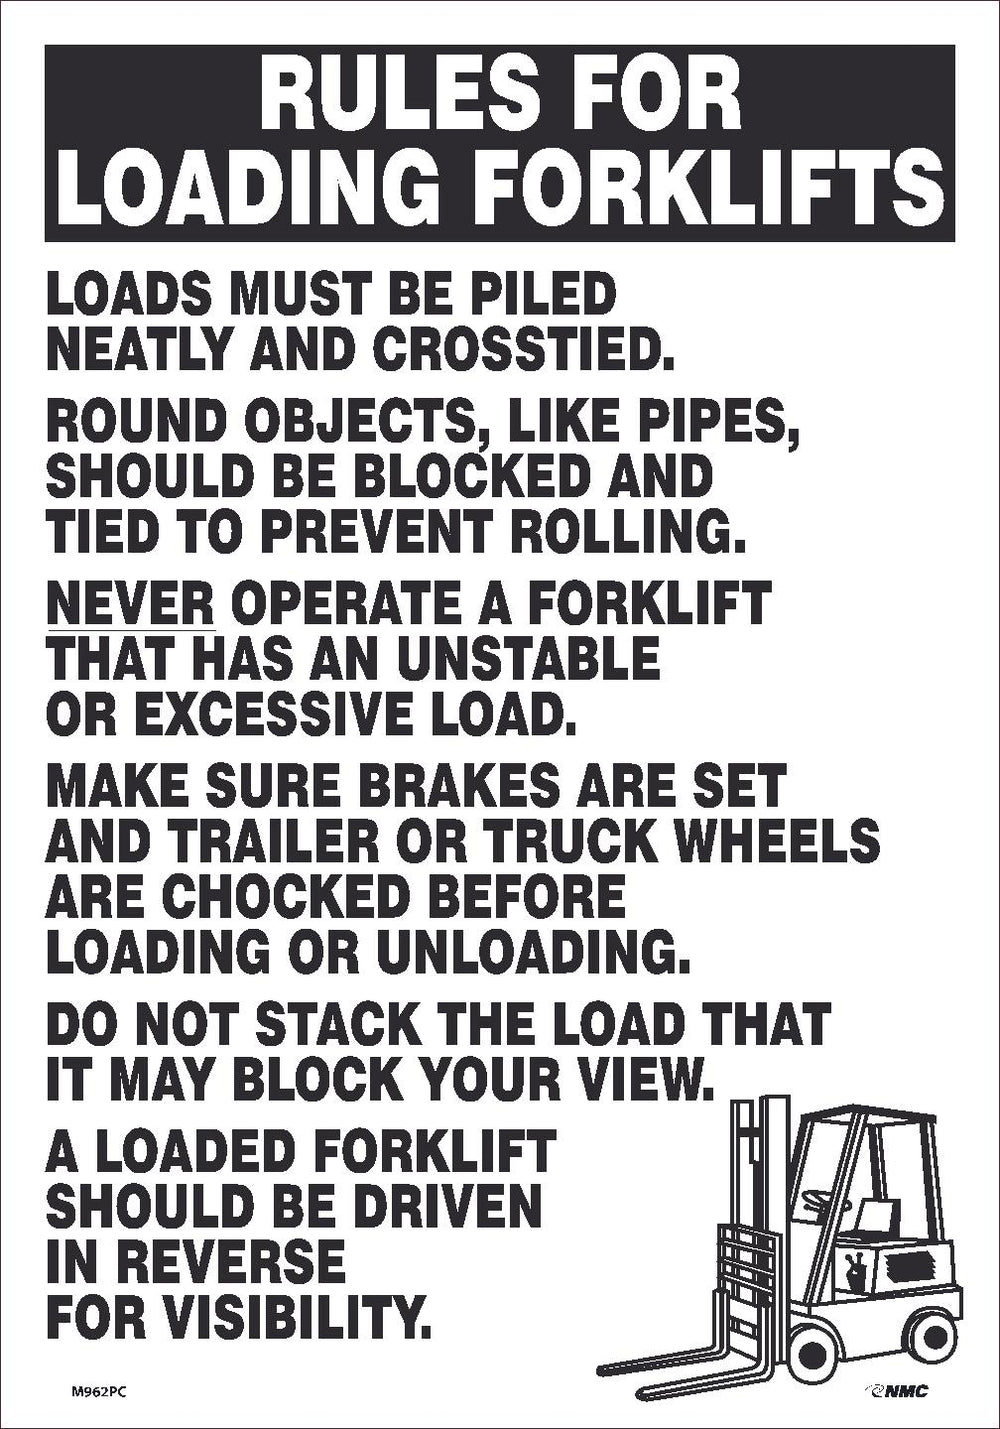 RULES FOR LOADING FORKLIFTS, 20X14, PS VINYL SIGN